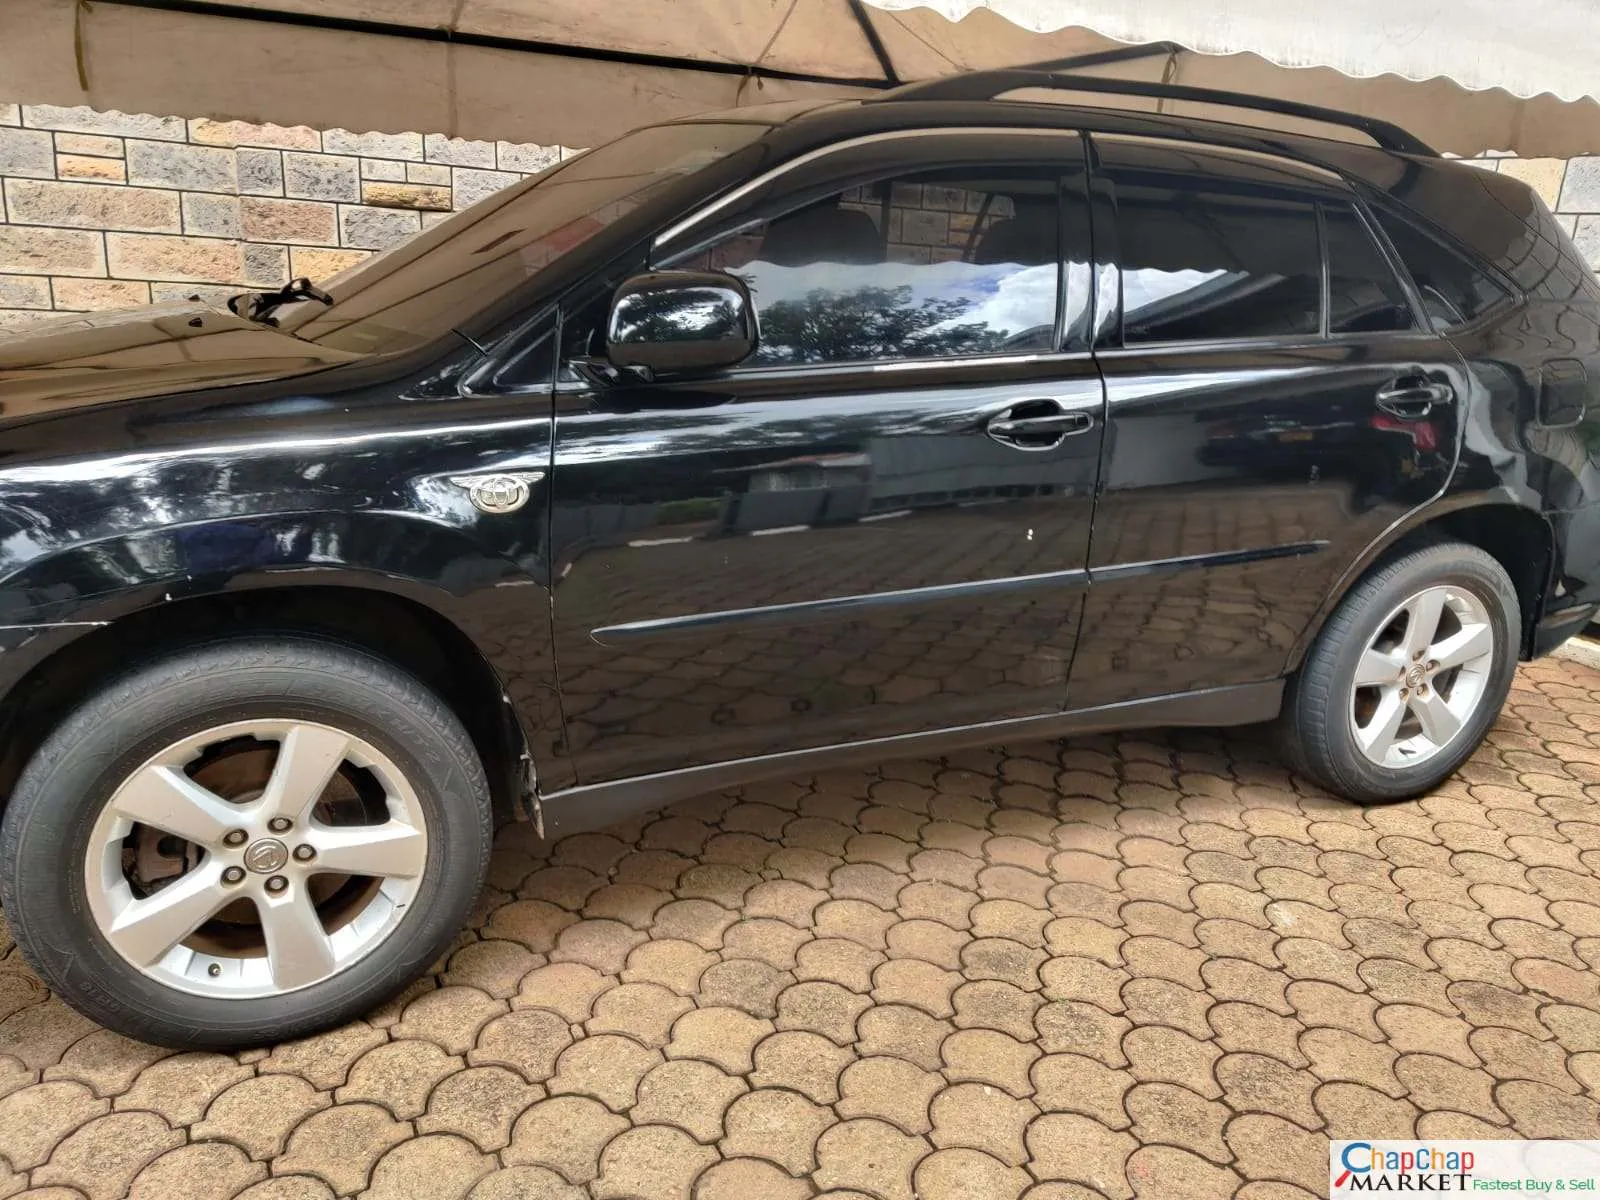 LEXUS RX 300 for sale in Kenya 550K You Pay 30% Deposit Trade in OK EXCLUSIVE (SOLD)